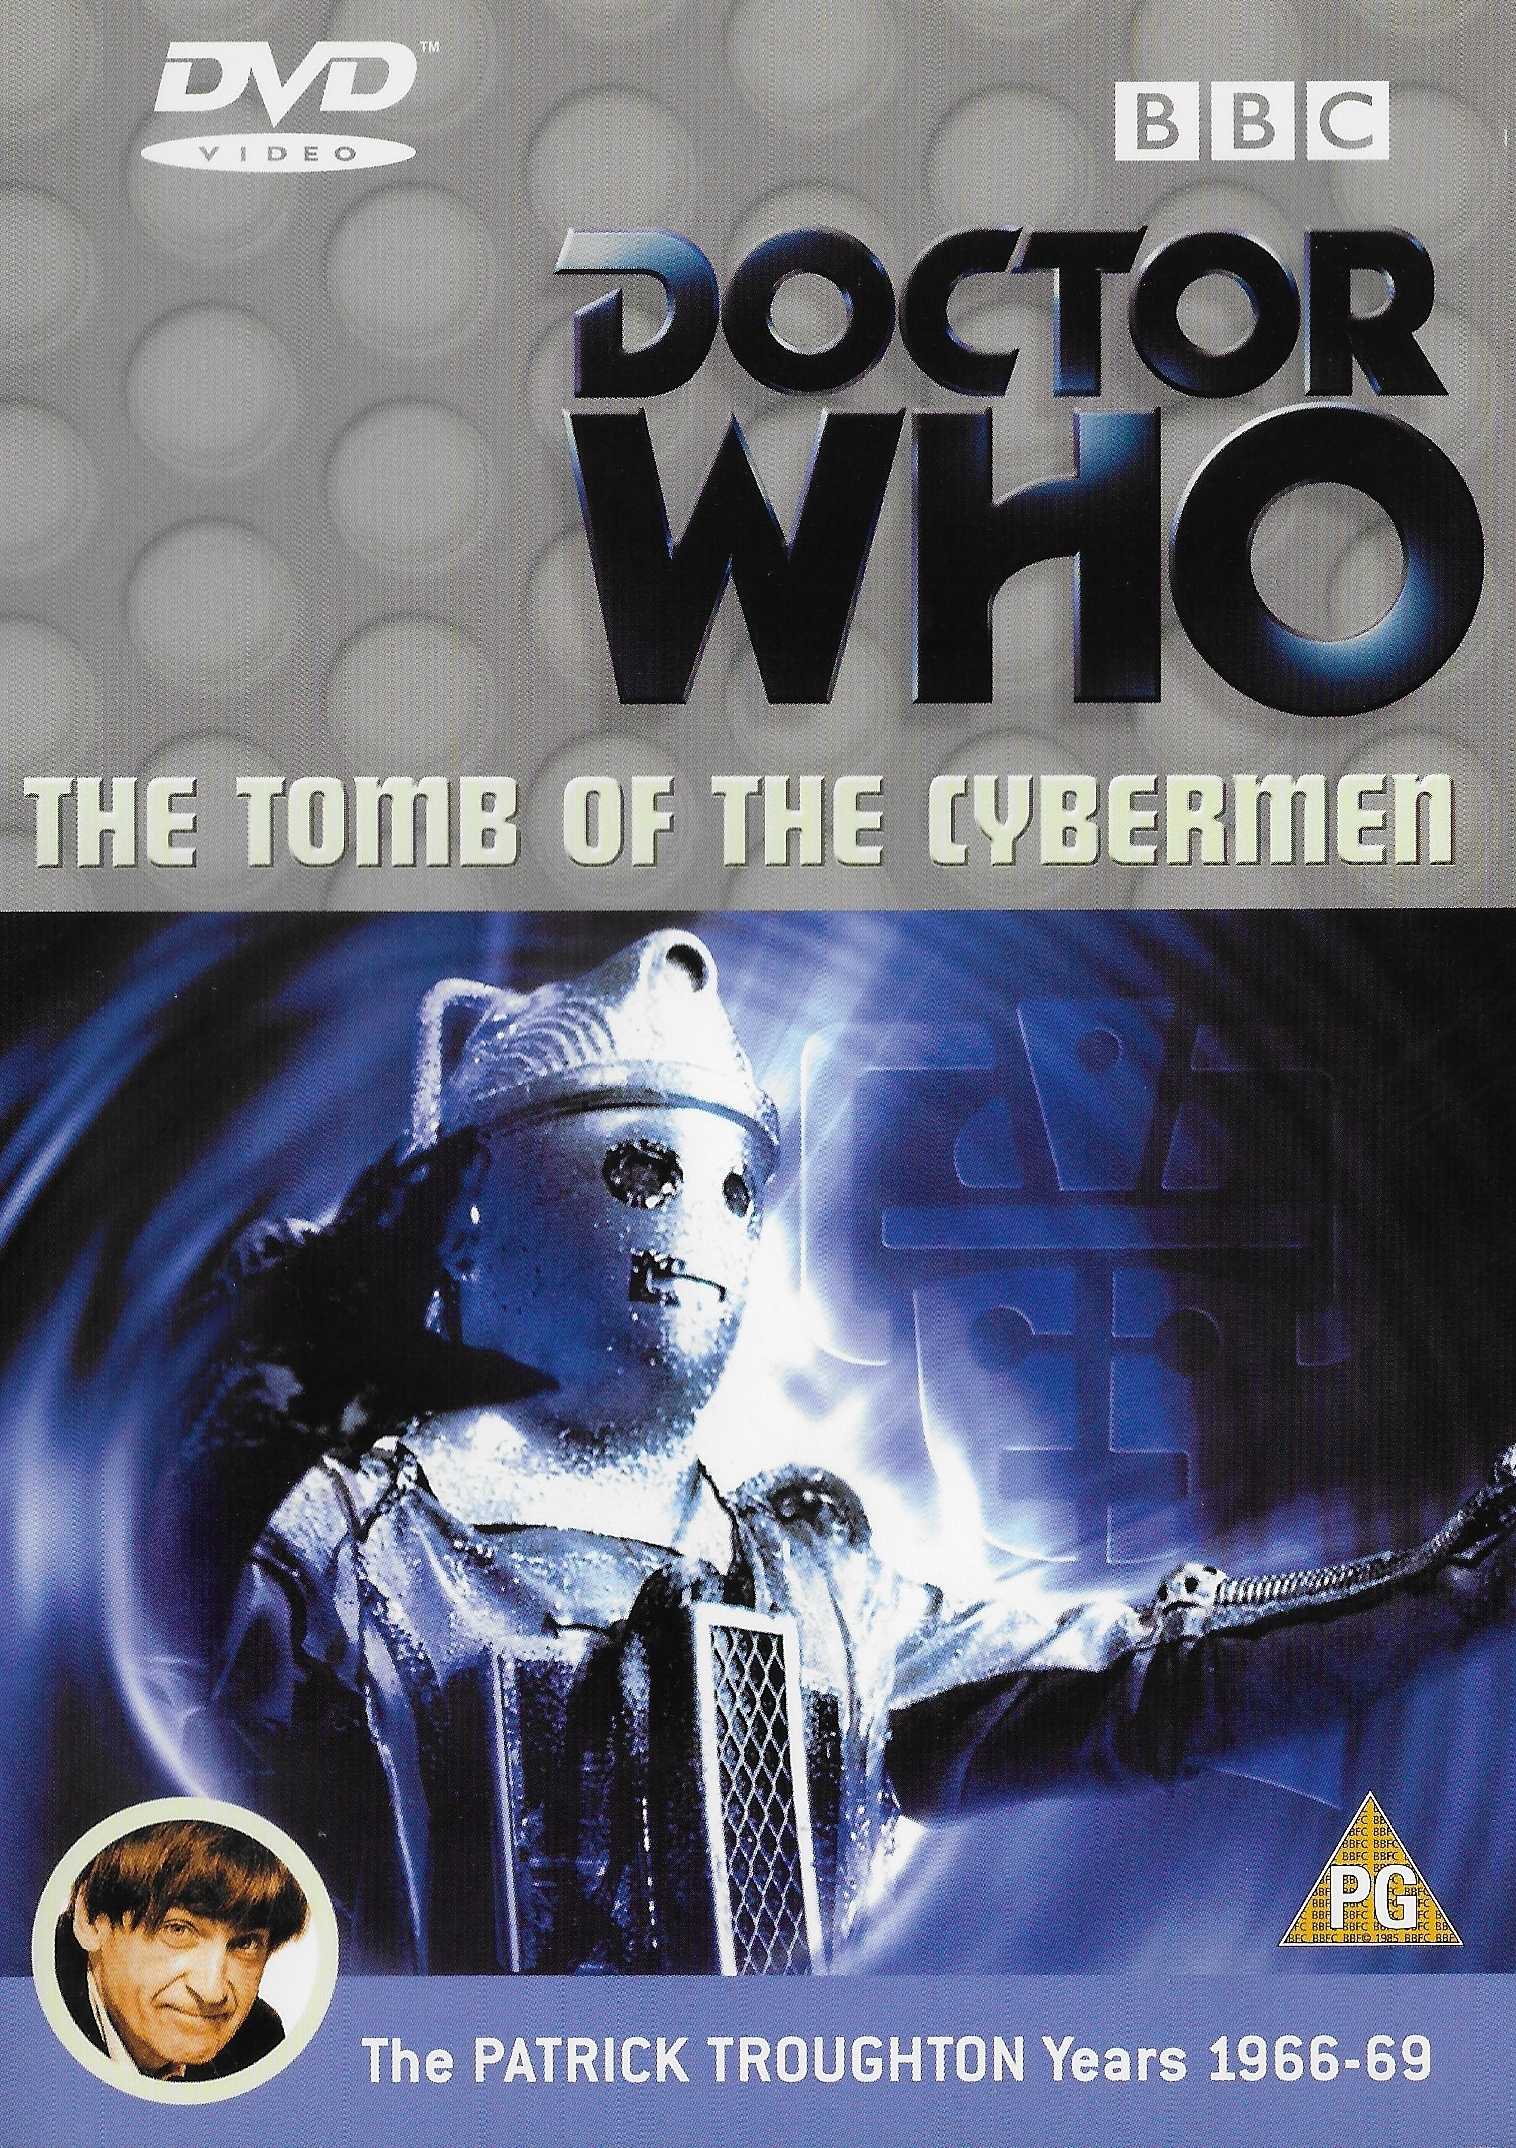 Picture of BBCDVD 1032 Doctor Who - The tomb of the Cybermen by artist Kit Pedler / Gerry Davis from the BBC dvds - Records and Tapes library